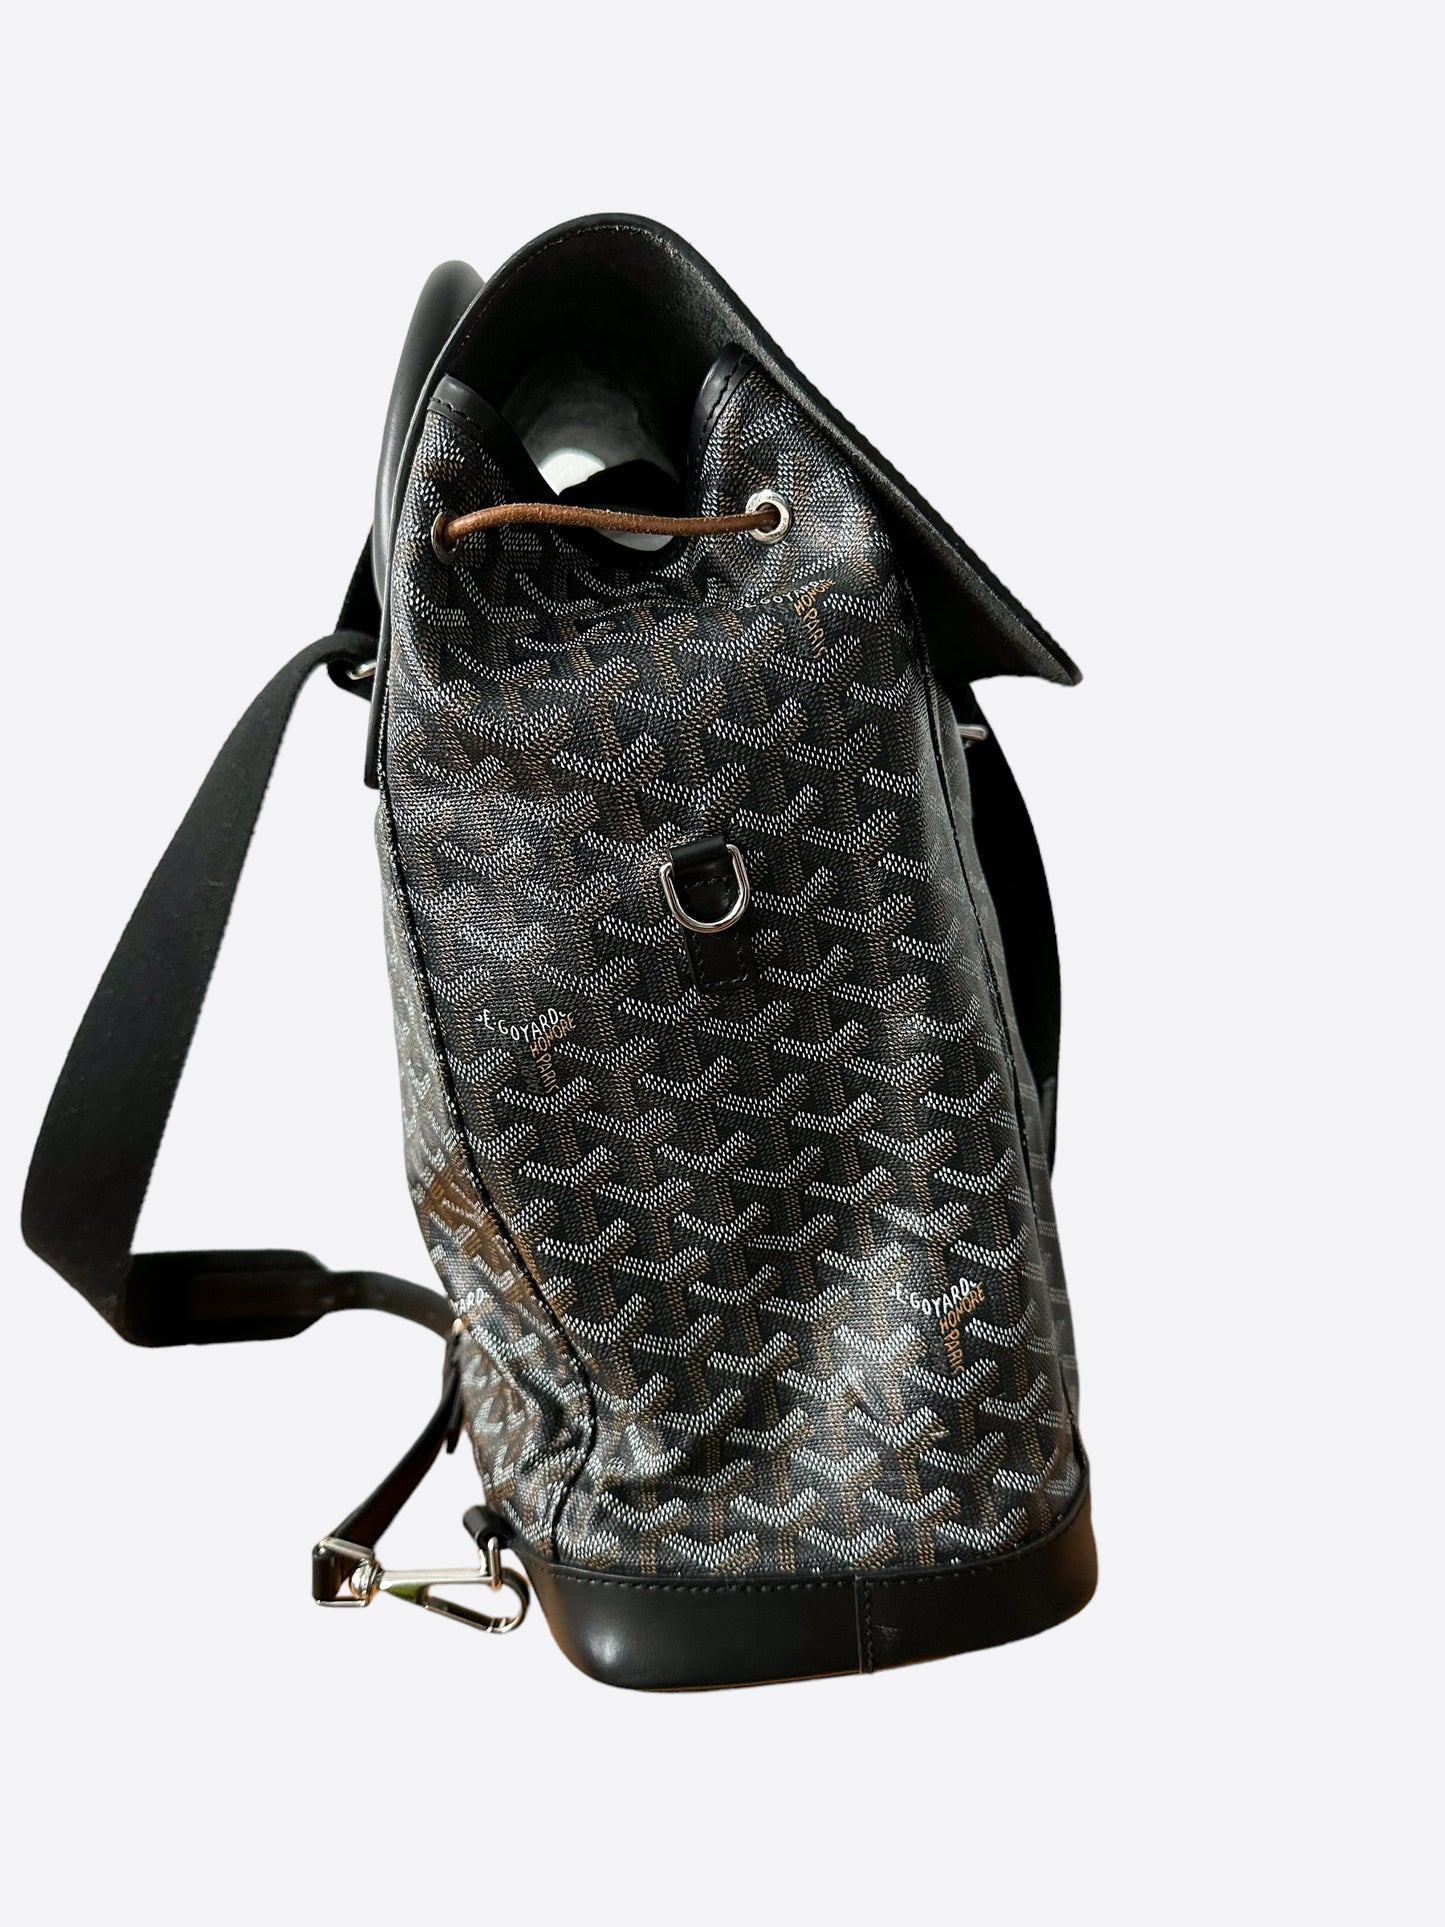 Sold at Auction: Goyard Alpin Backpack Coated Canvas MM Black